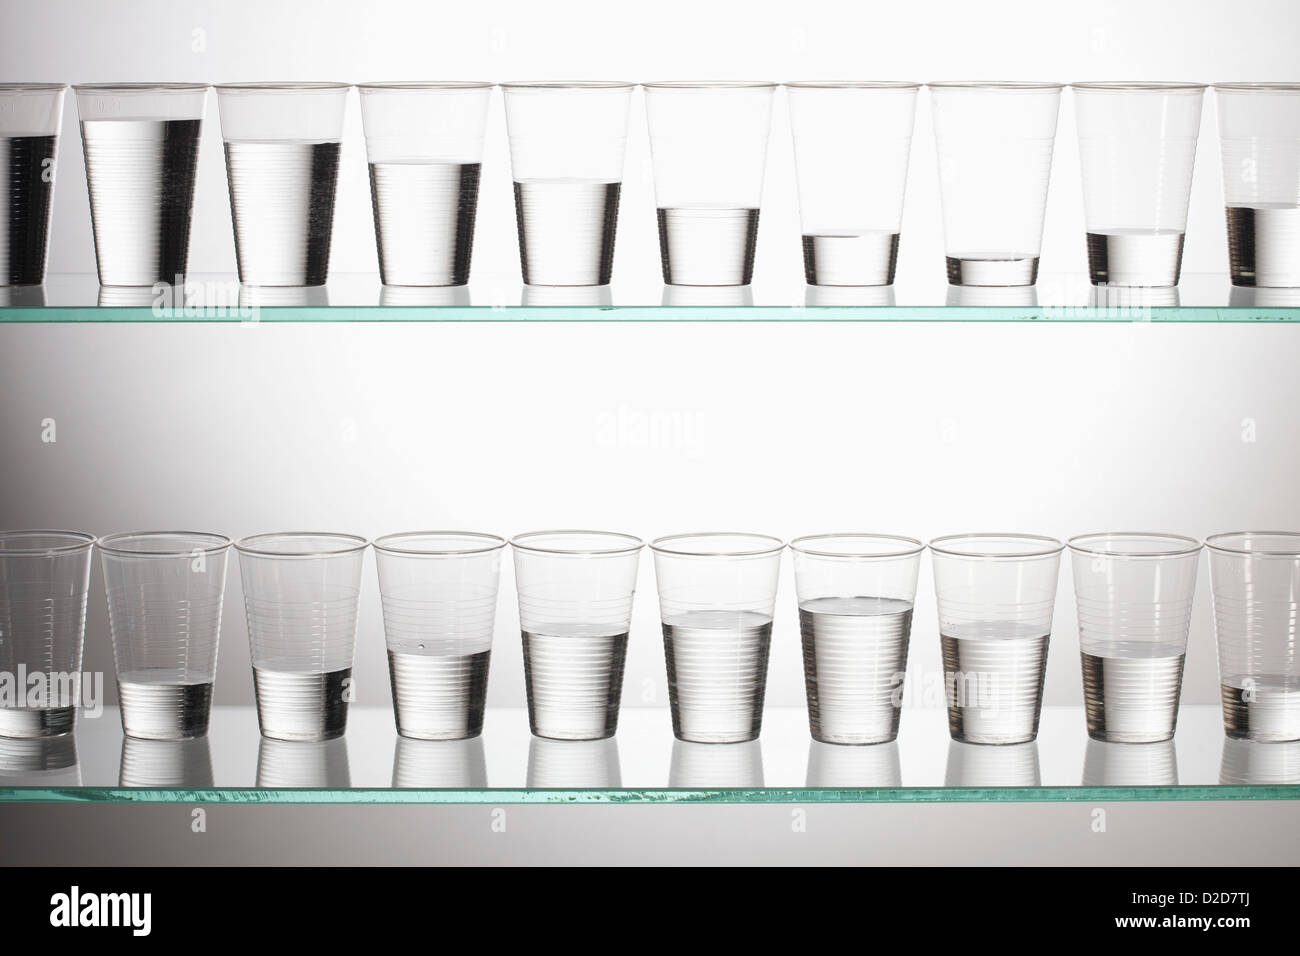 Two shelves with glasses of water filled with varying amounts of water Stock Photo